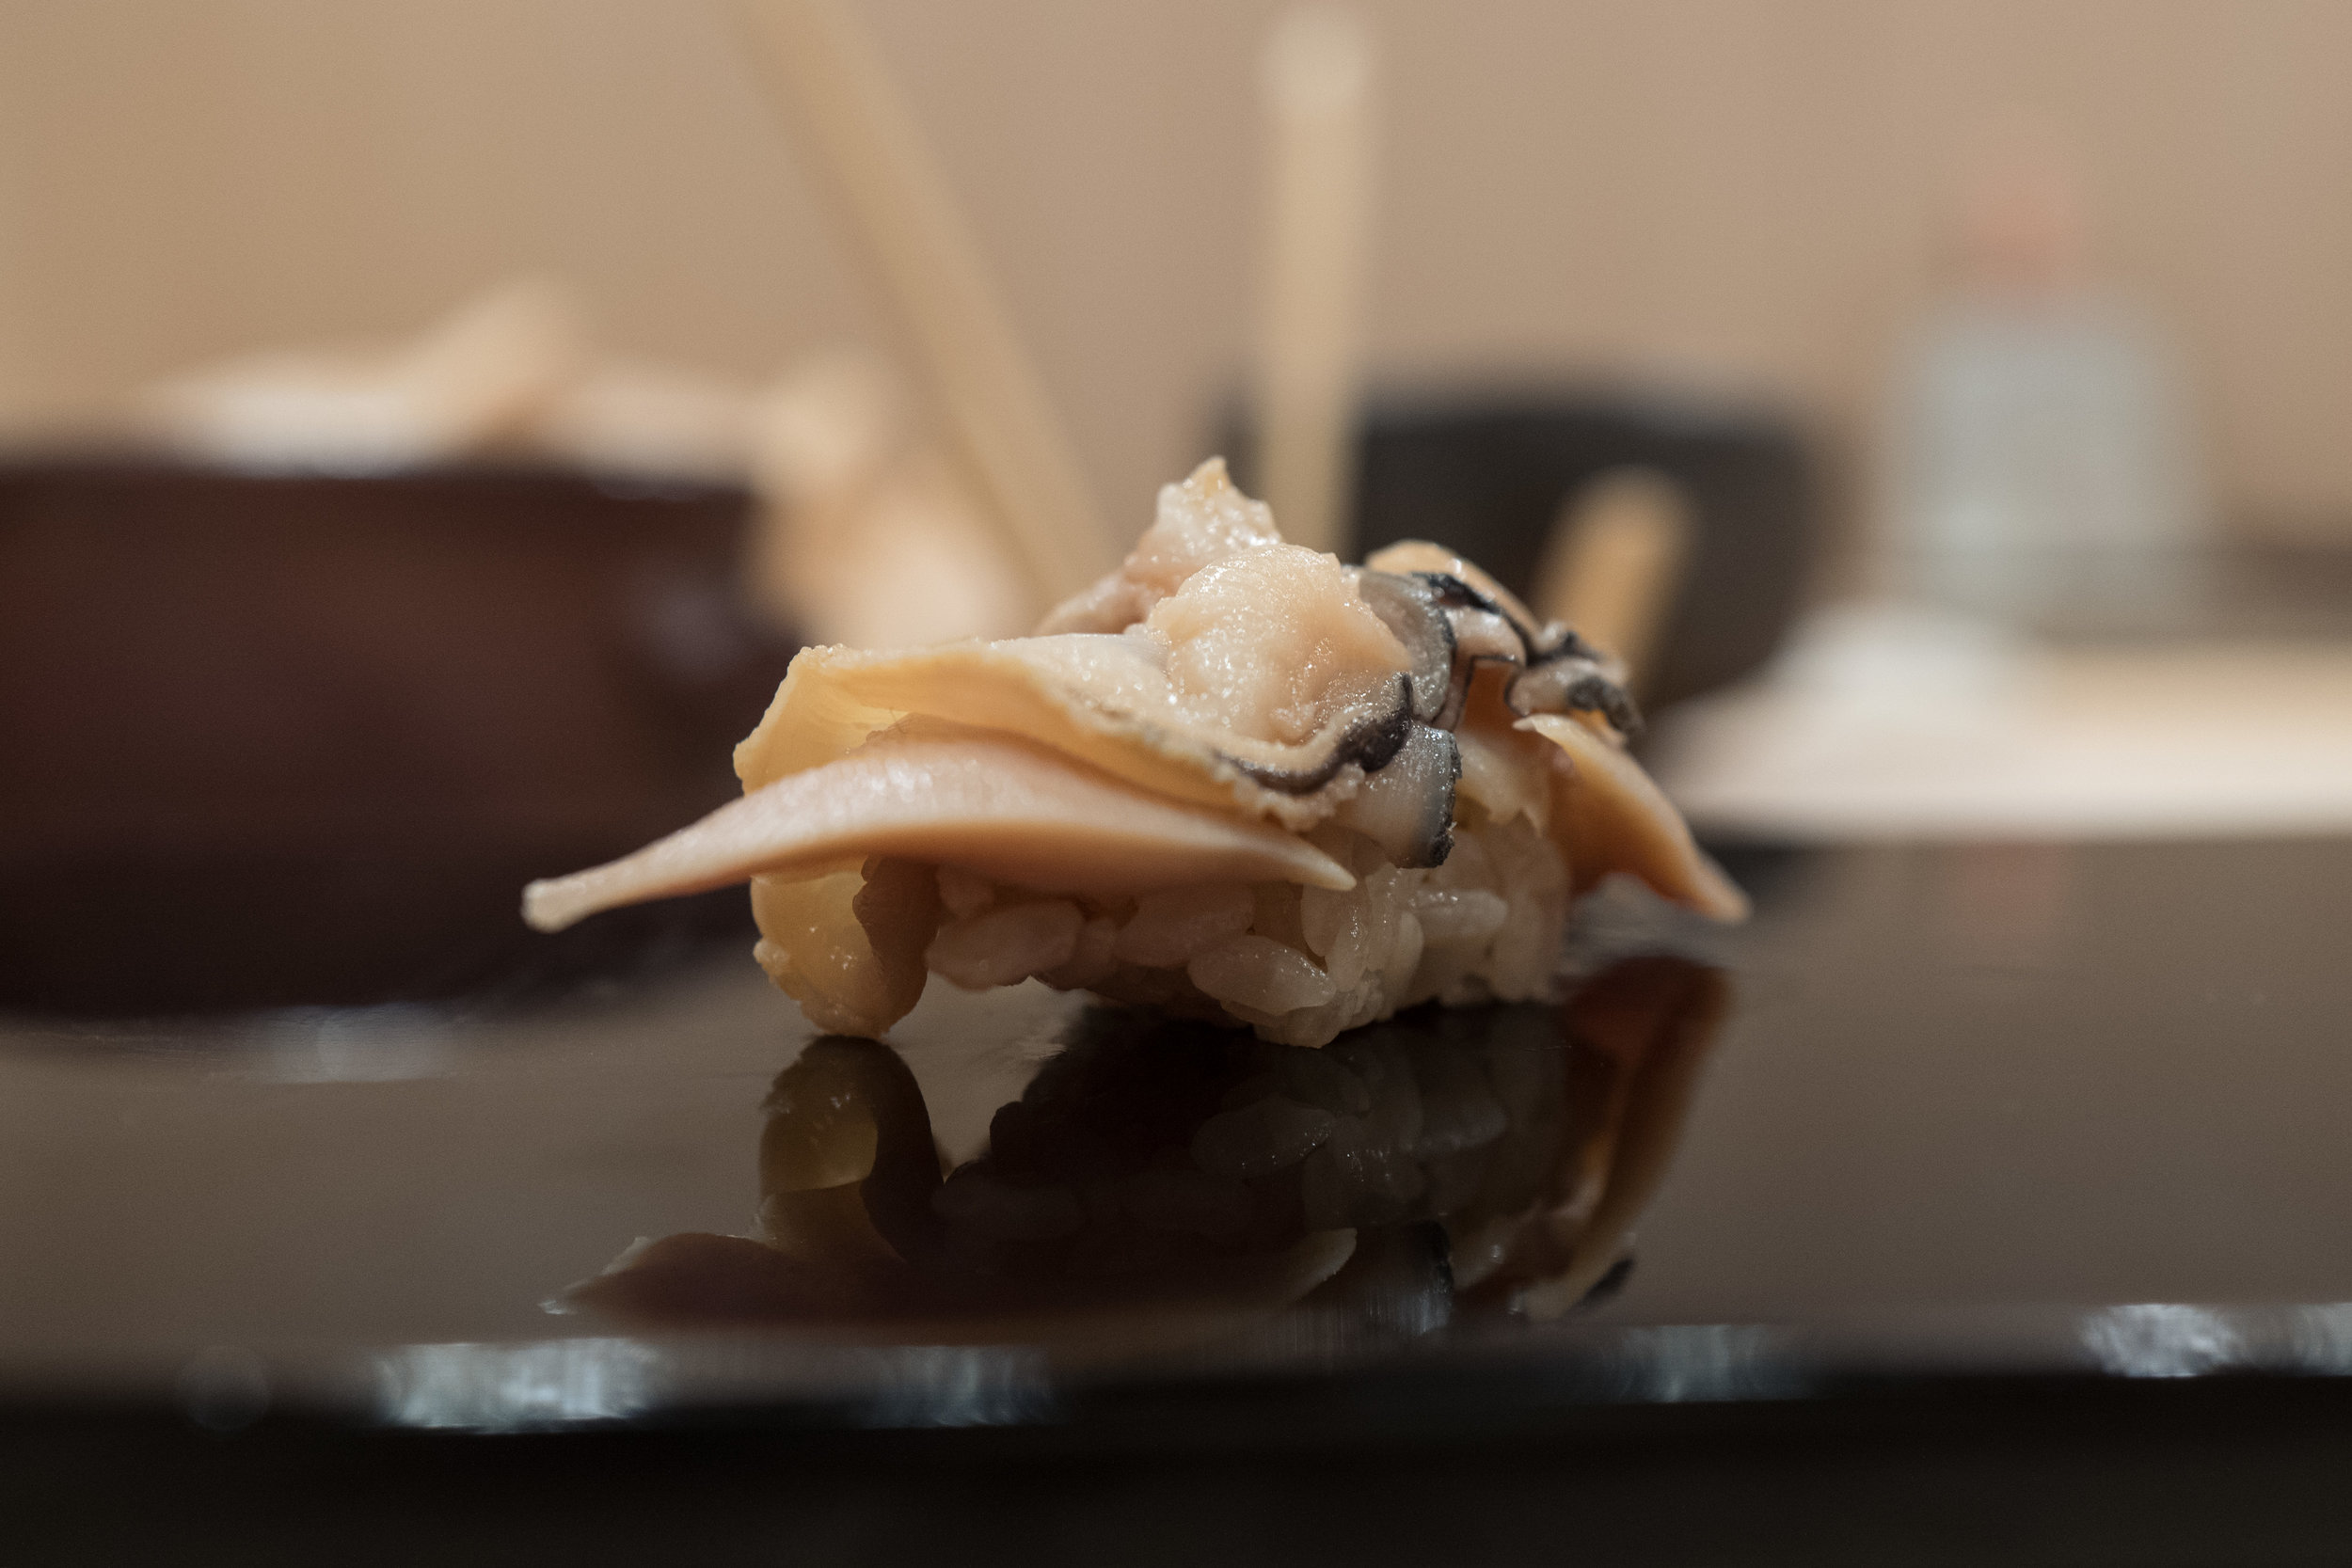  At the end of the meal, chef Keita realized he forgot to serve me a piece of hamaguri. He laughed, apologized, and offered it to me as a final piece. It was delicious, and actually a nice way to end the meal.&nbsp; 